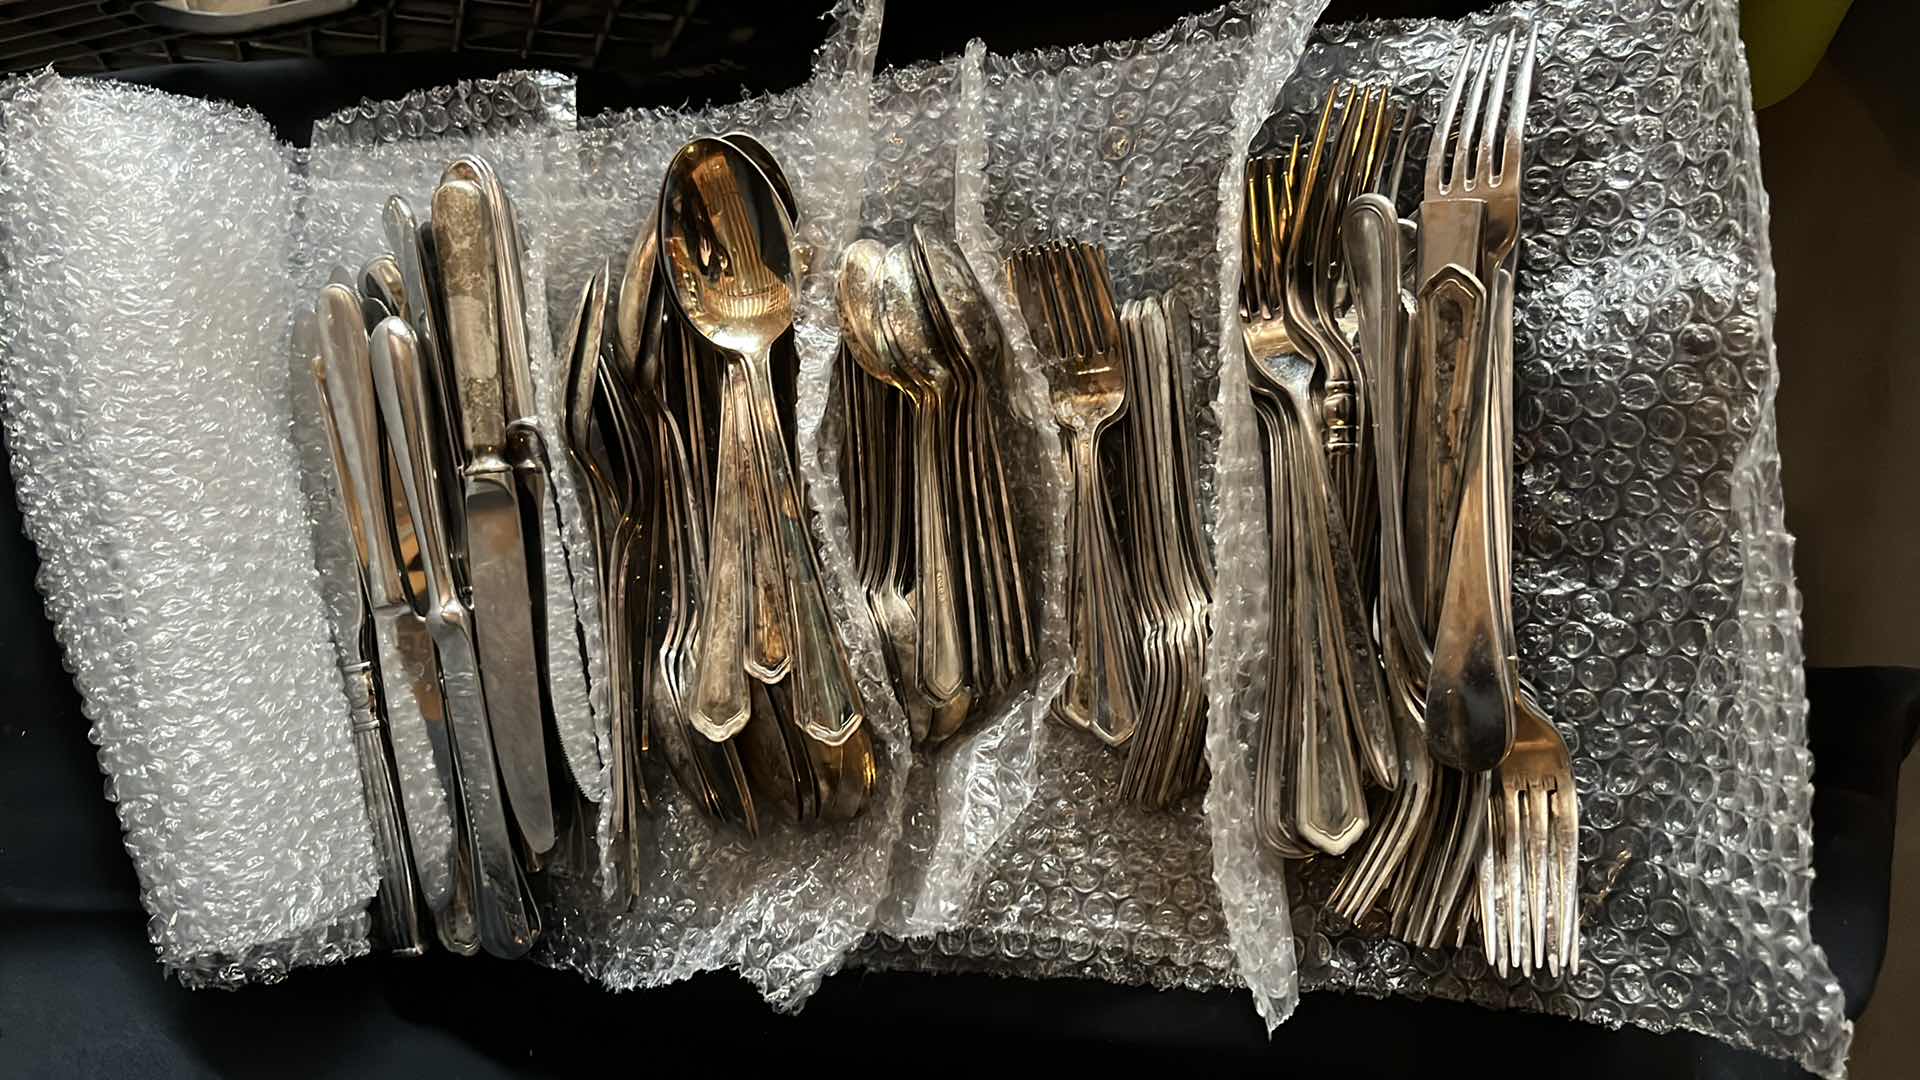 Photo 2 of FLATWARE VARIOUS STYLES, BUTTER KNIFE, SMALL SPOON, SERVING SPOON, SALAD FORK, SMALL FORK 20 EACH (100 TOTAL)